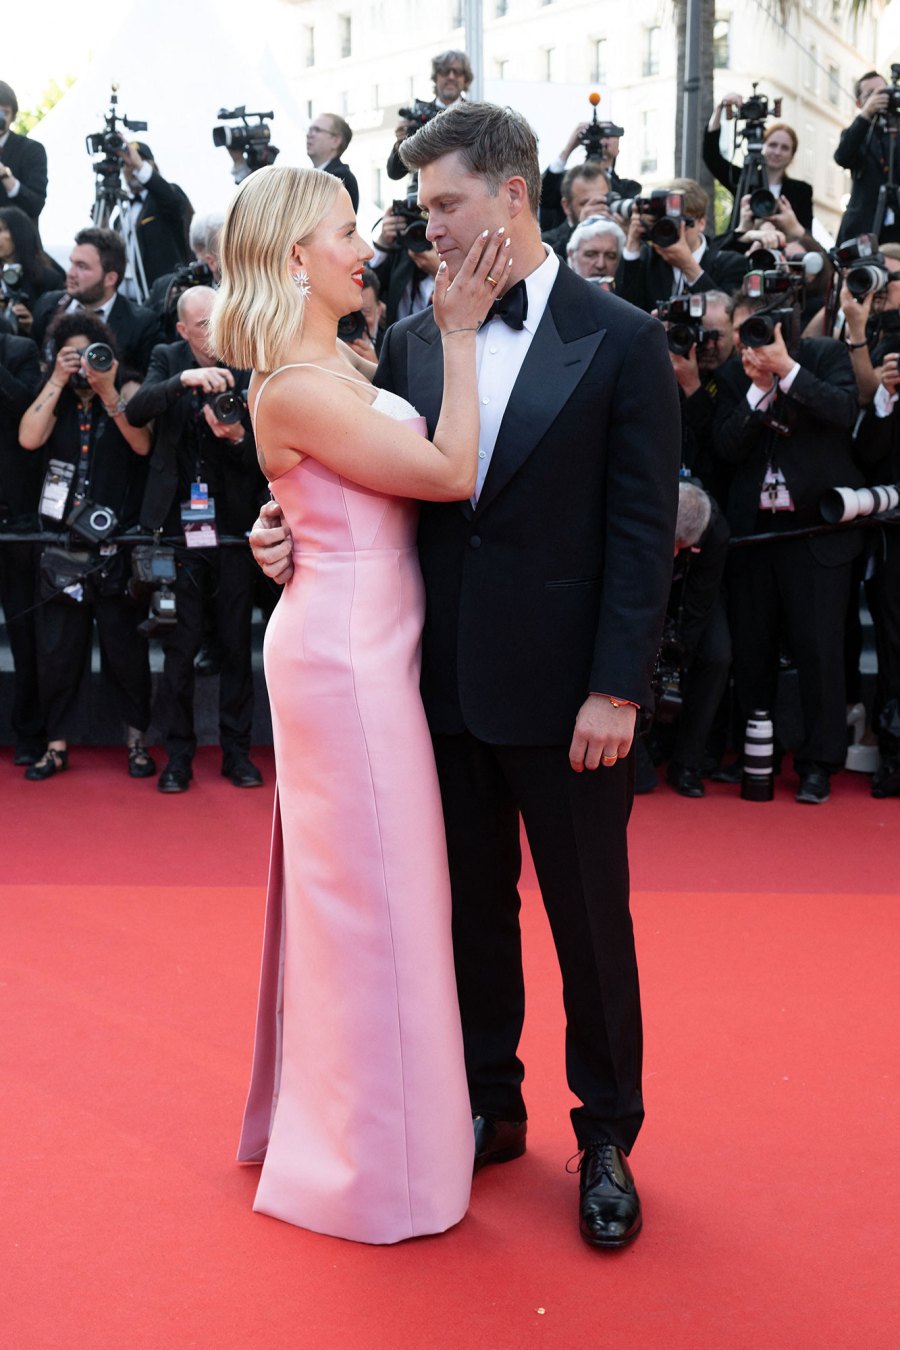 Scarlett Johansson and Colin Jost Make Rare Red Carpet Appearance at Cannes Film Festival: Photos